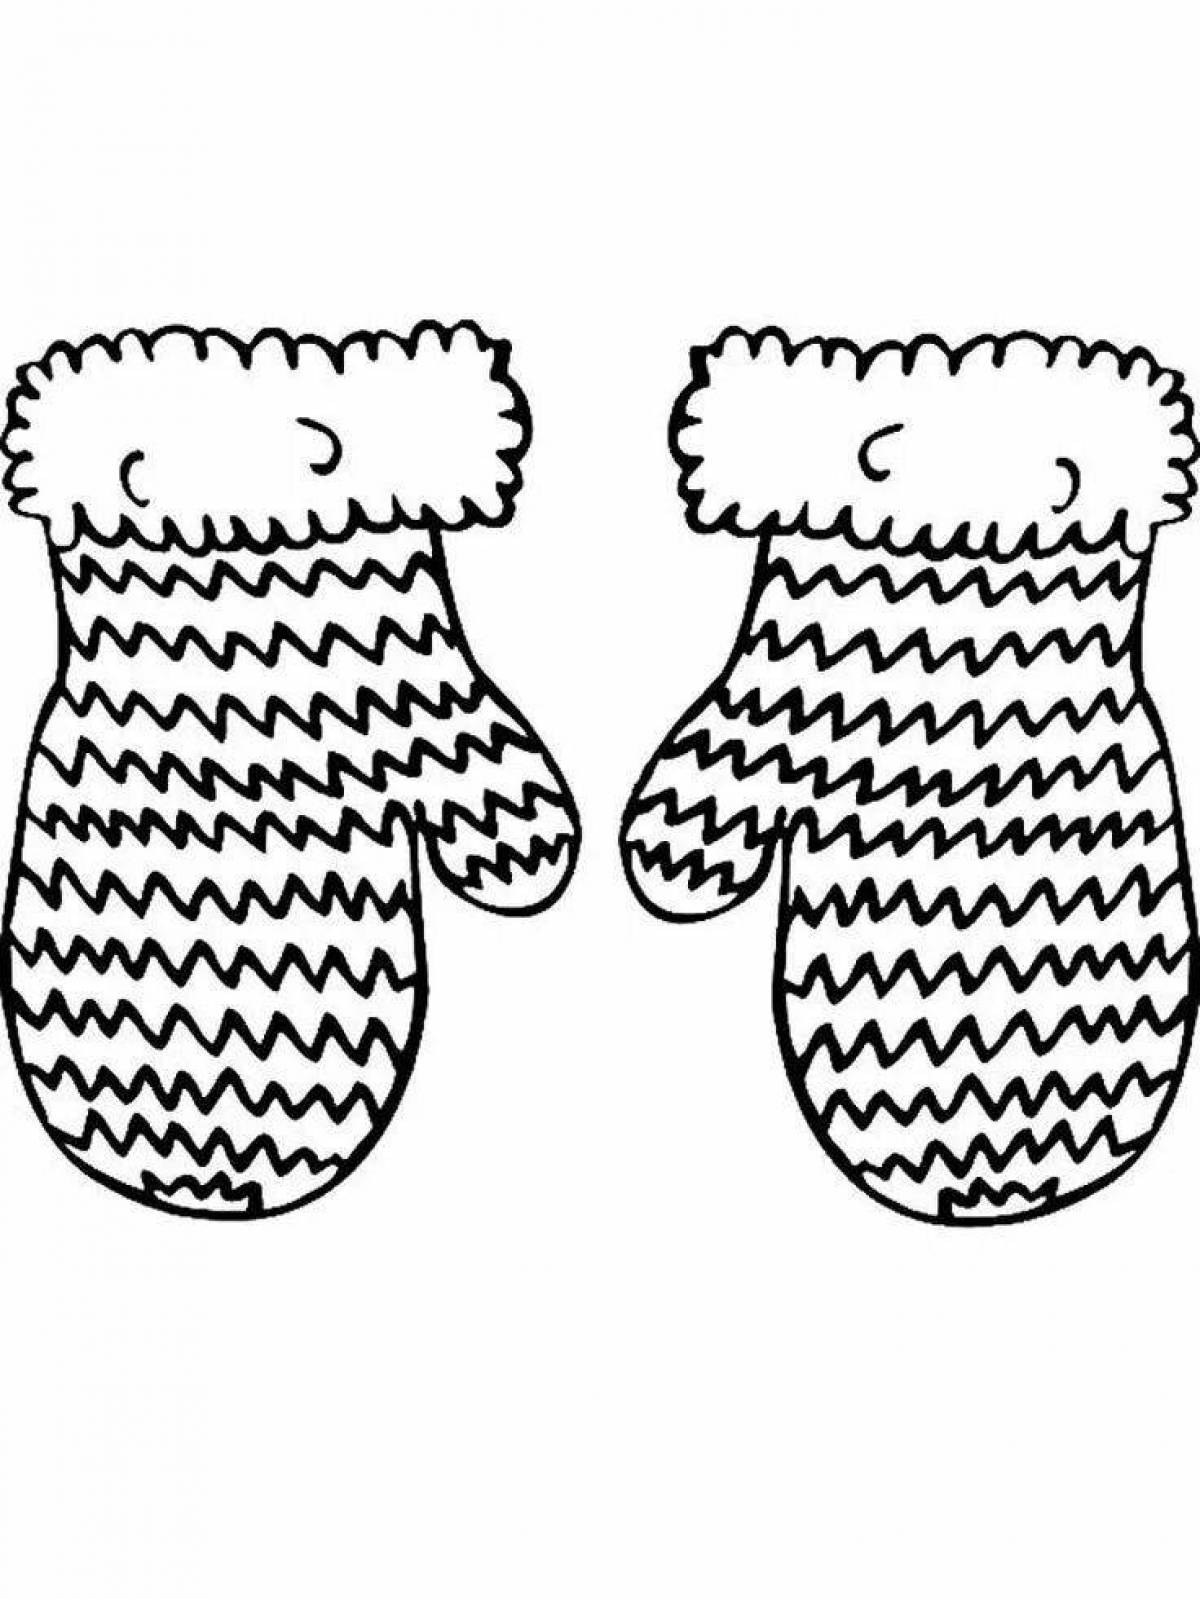 Bright mitten coloring